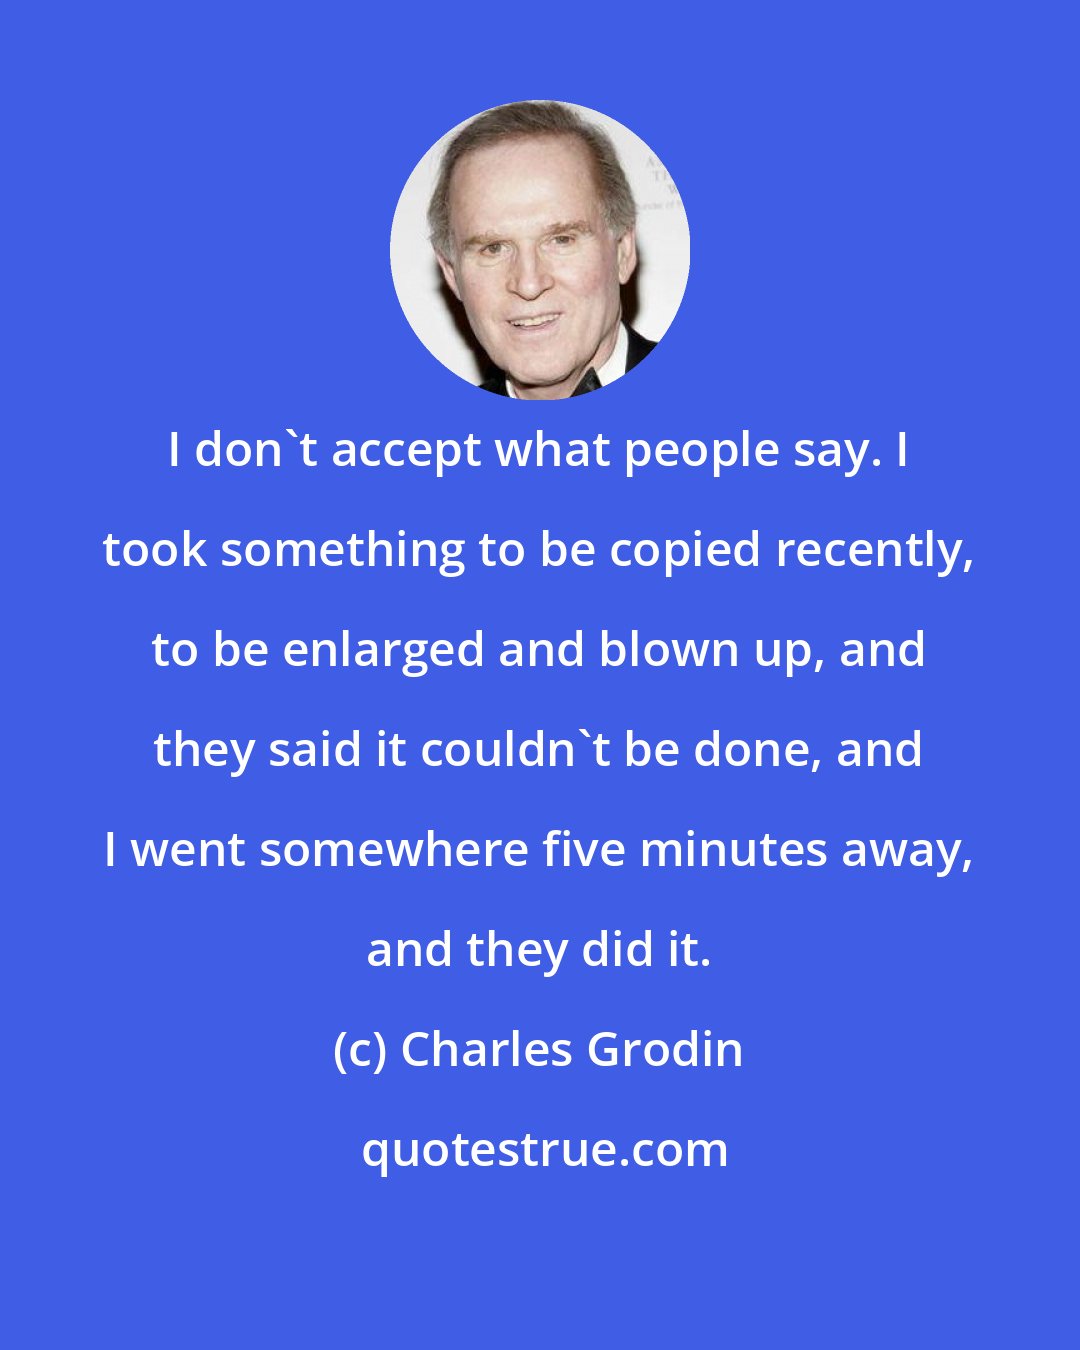 Charles Grodin: I don't accept what people say. I took something to be copied recently, to be enlarged and blown up, and they said it couldn't be done, and I went somewhere five minutes away, and they did it.